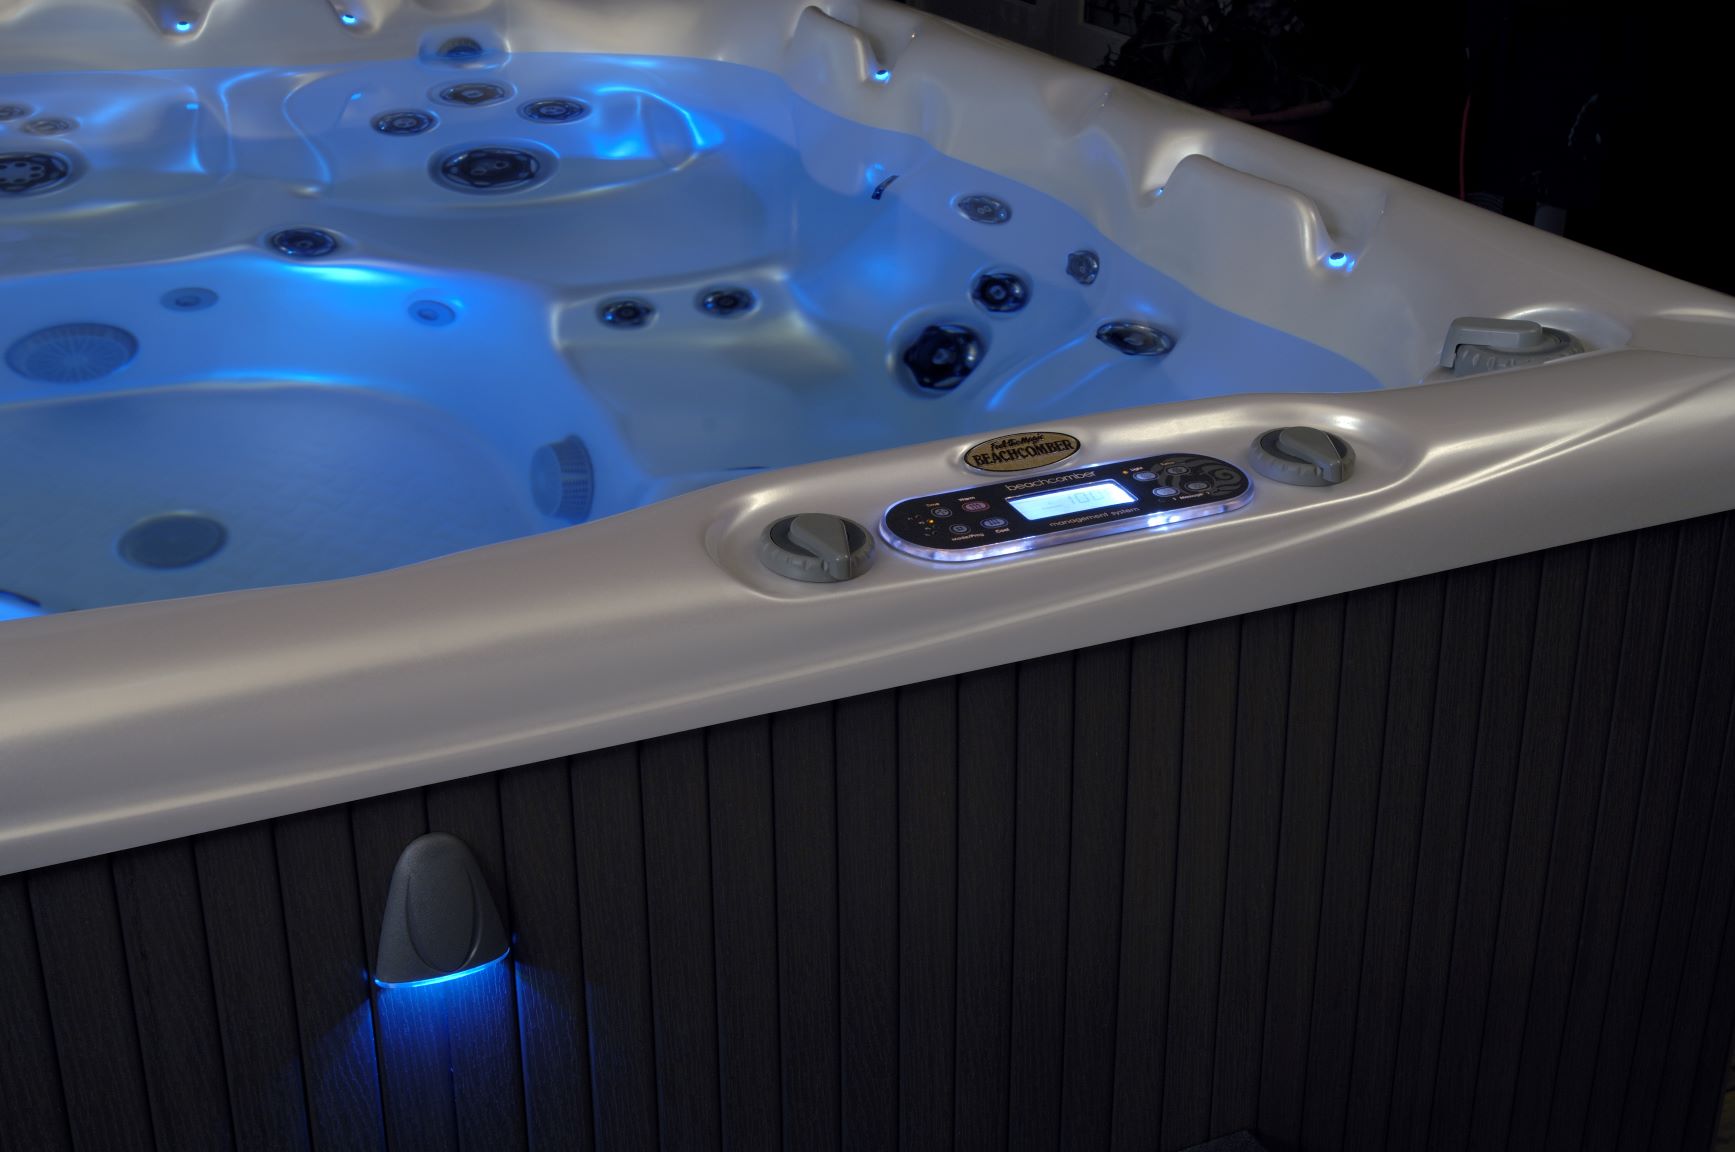 Beachcomber hot tub being powered up